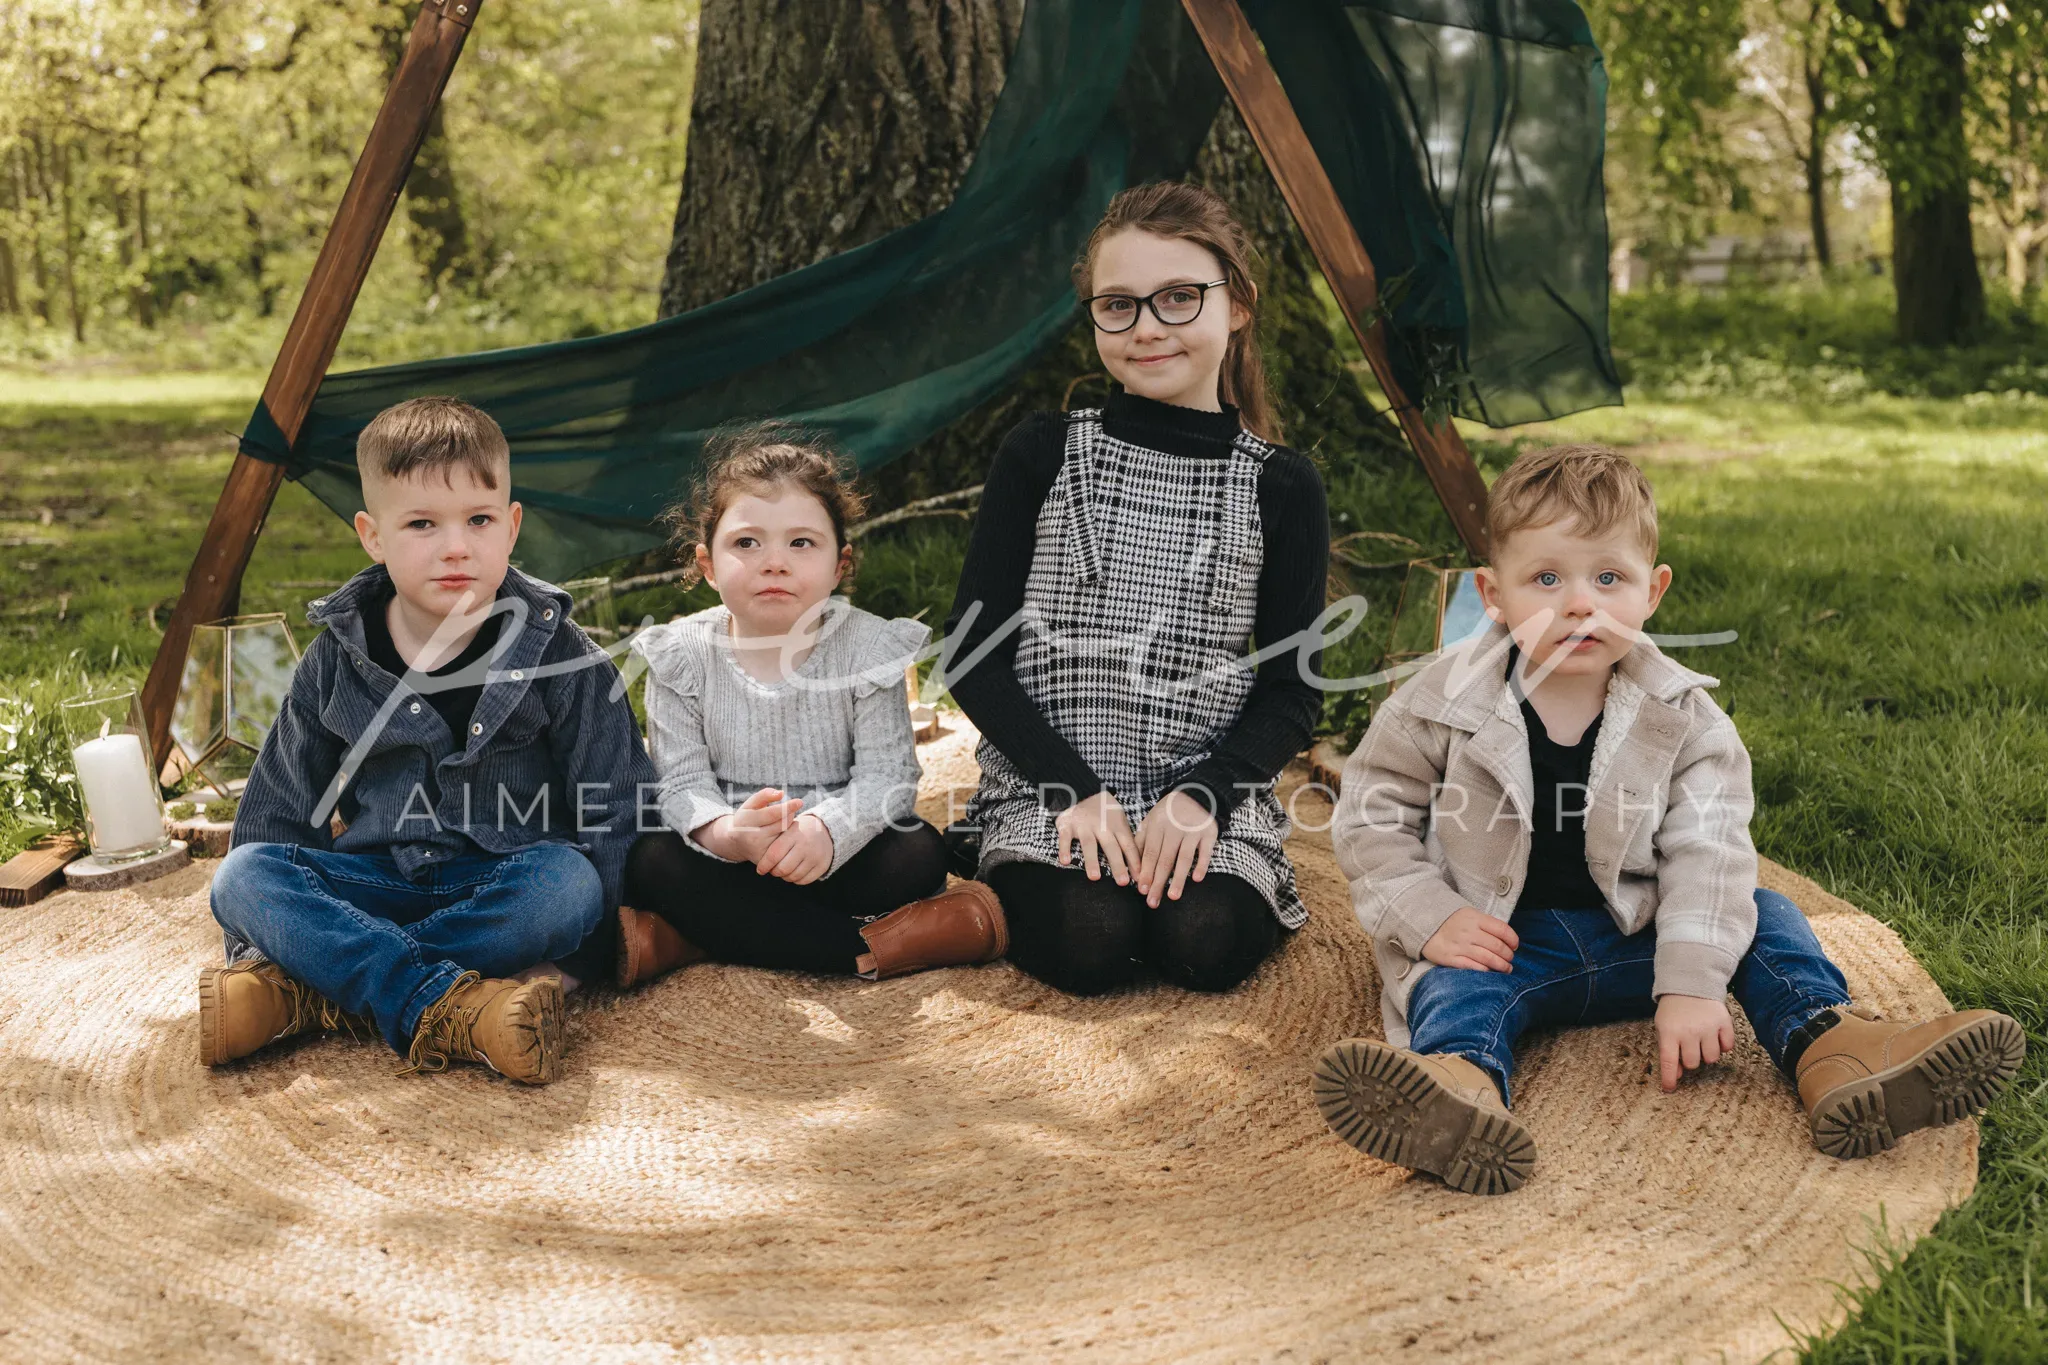 Four children sit under a makeshift tent in a park. From left: a boy in a denim jacket, Gabrielle in a white top, another girl in a plaid dress with glasses, and a